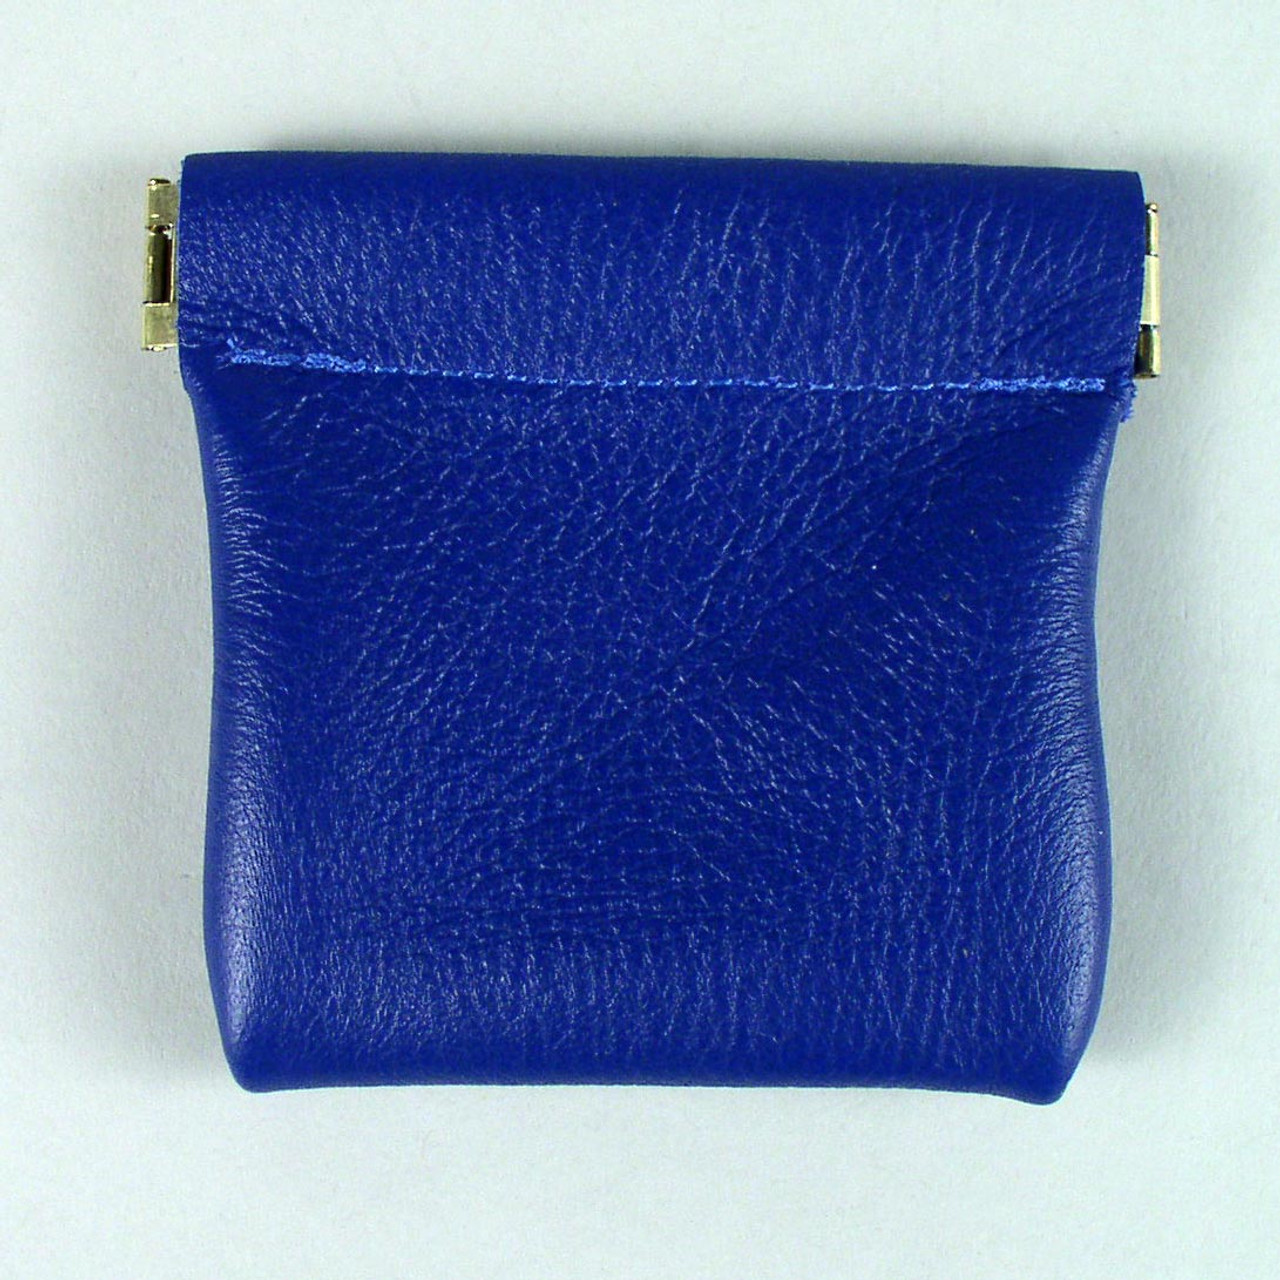 Gulf Wallet Card holder and coin purse cobalt blue leather